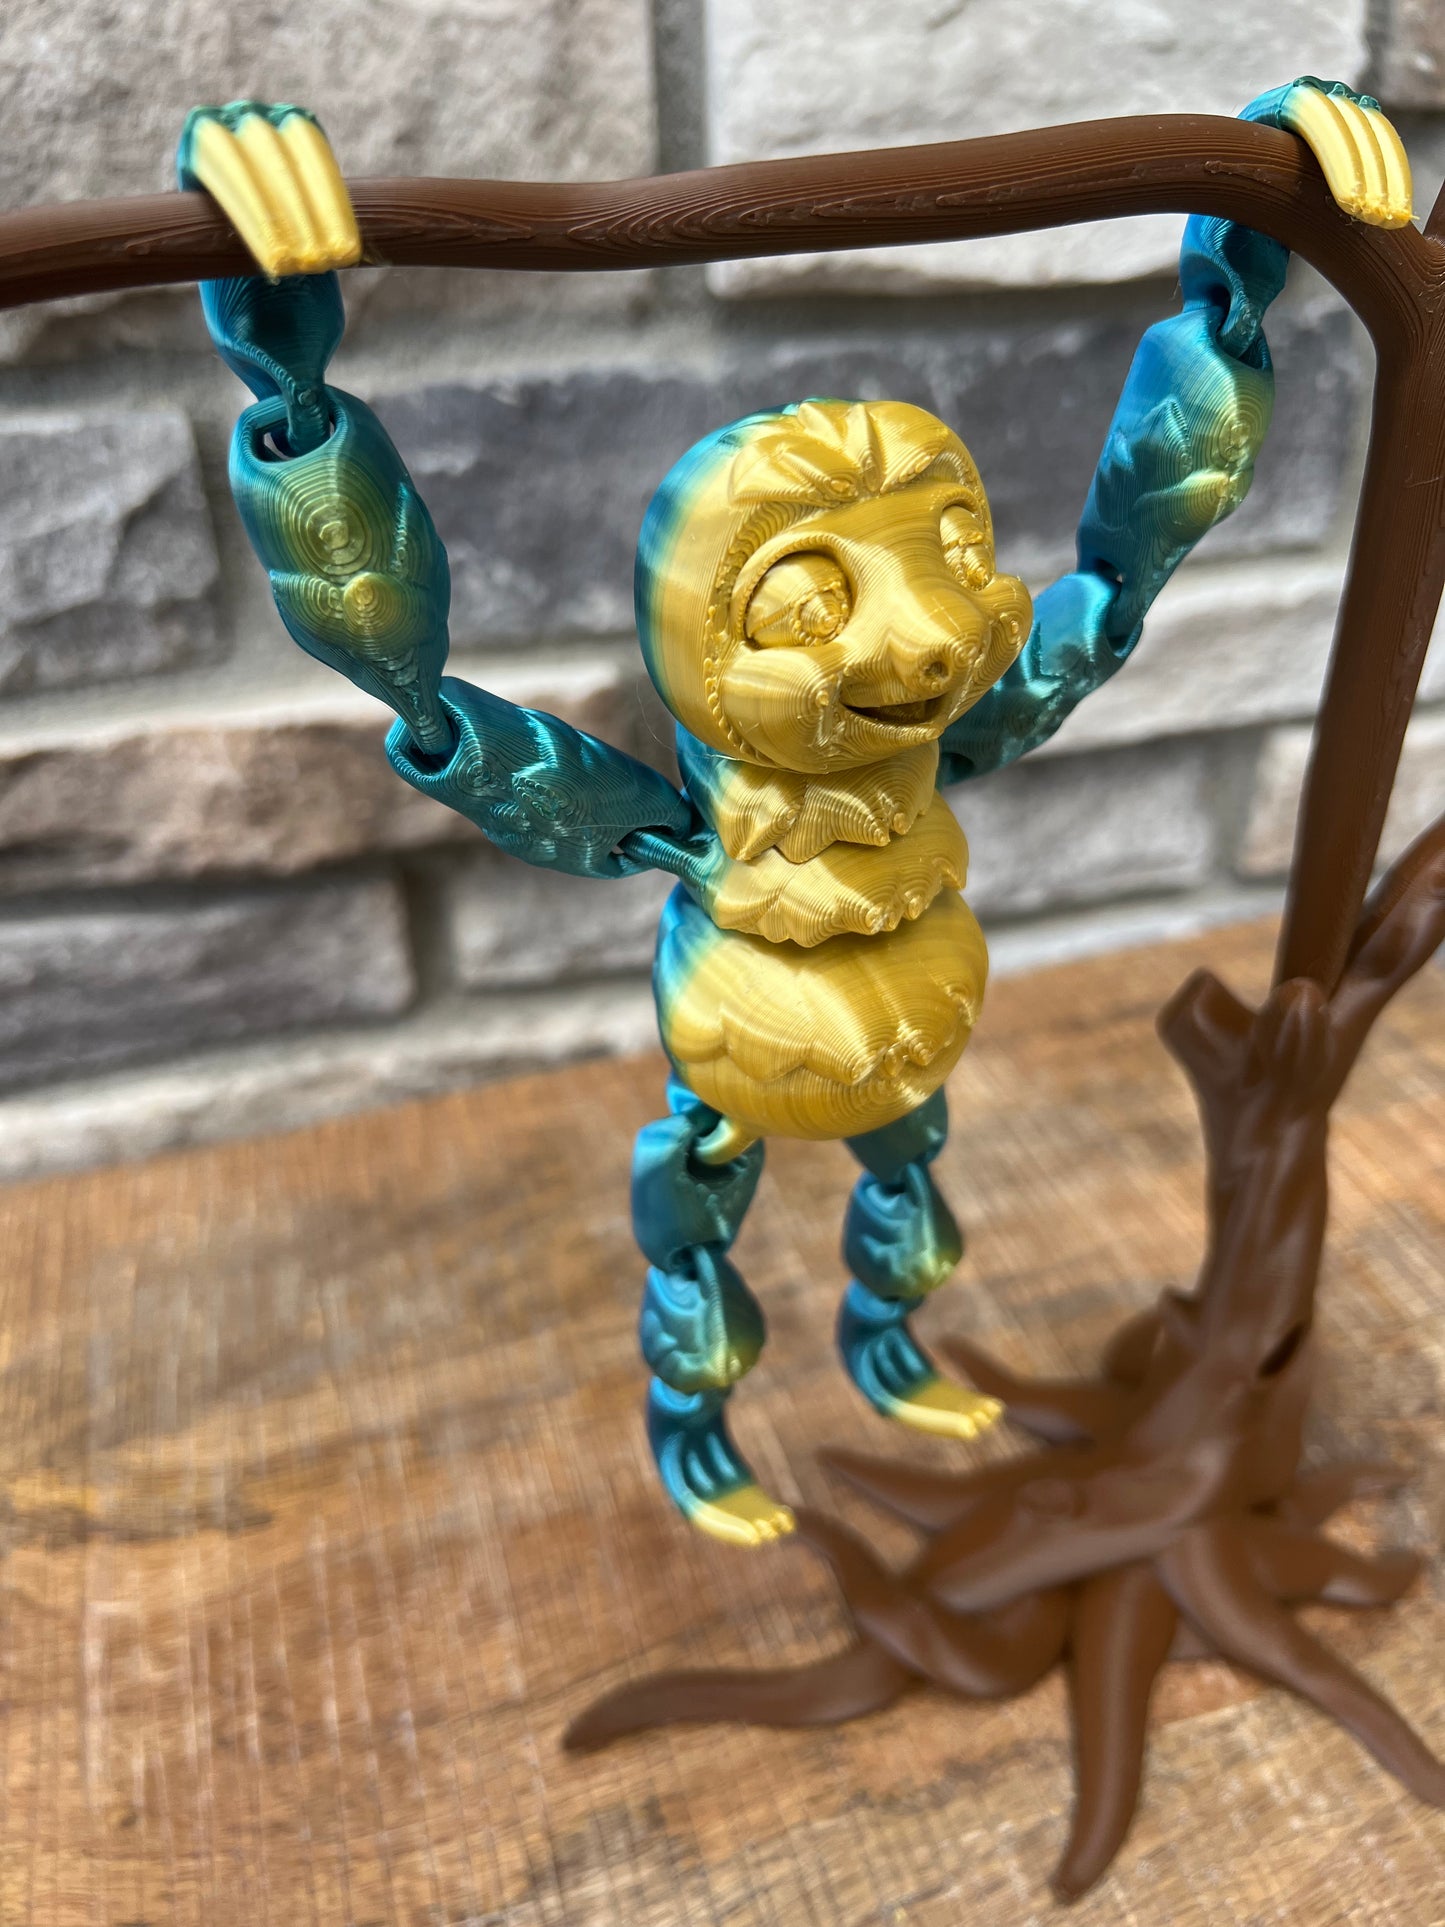 Sloth | 3D Printed | Articulated Flexible | Custom Fidget Toy